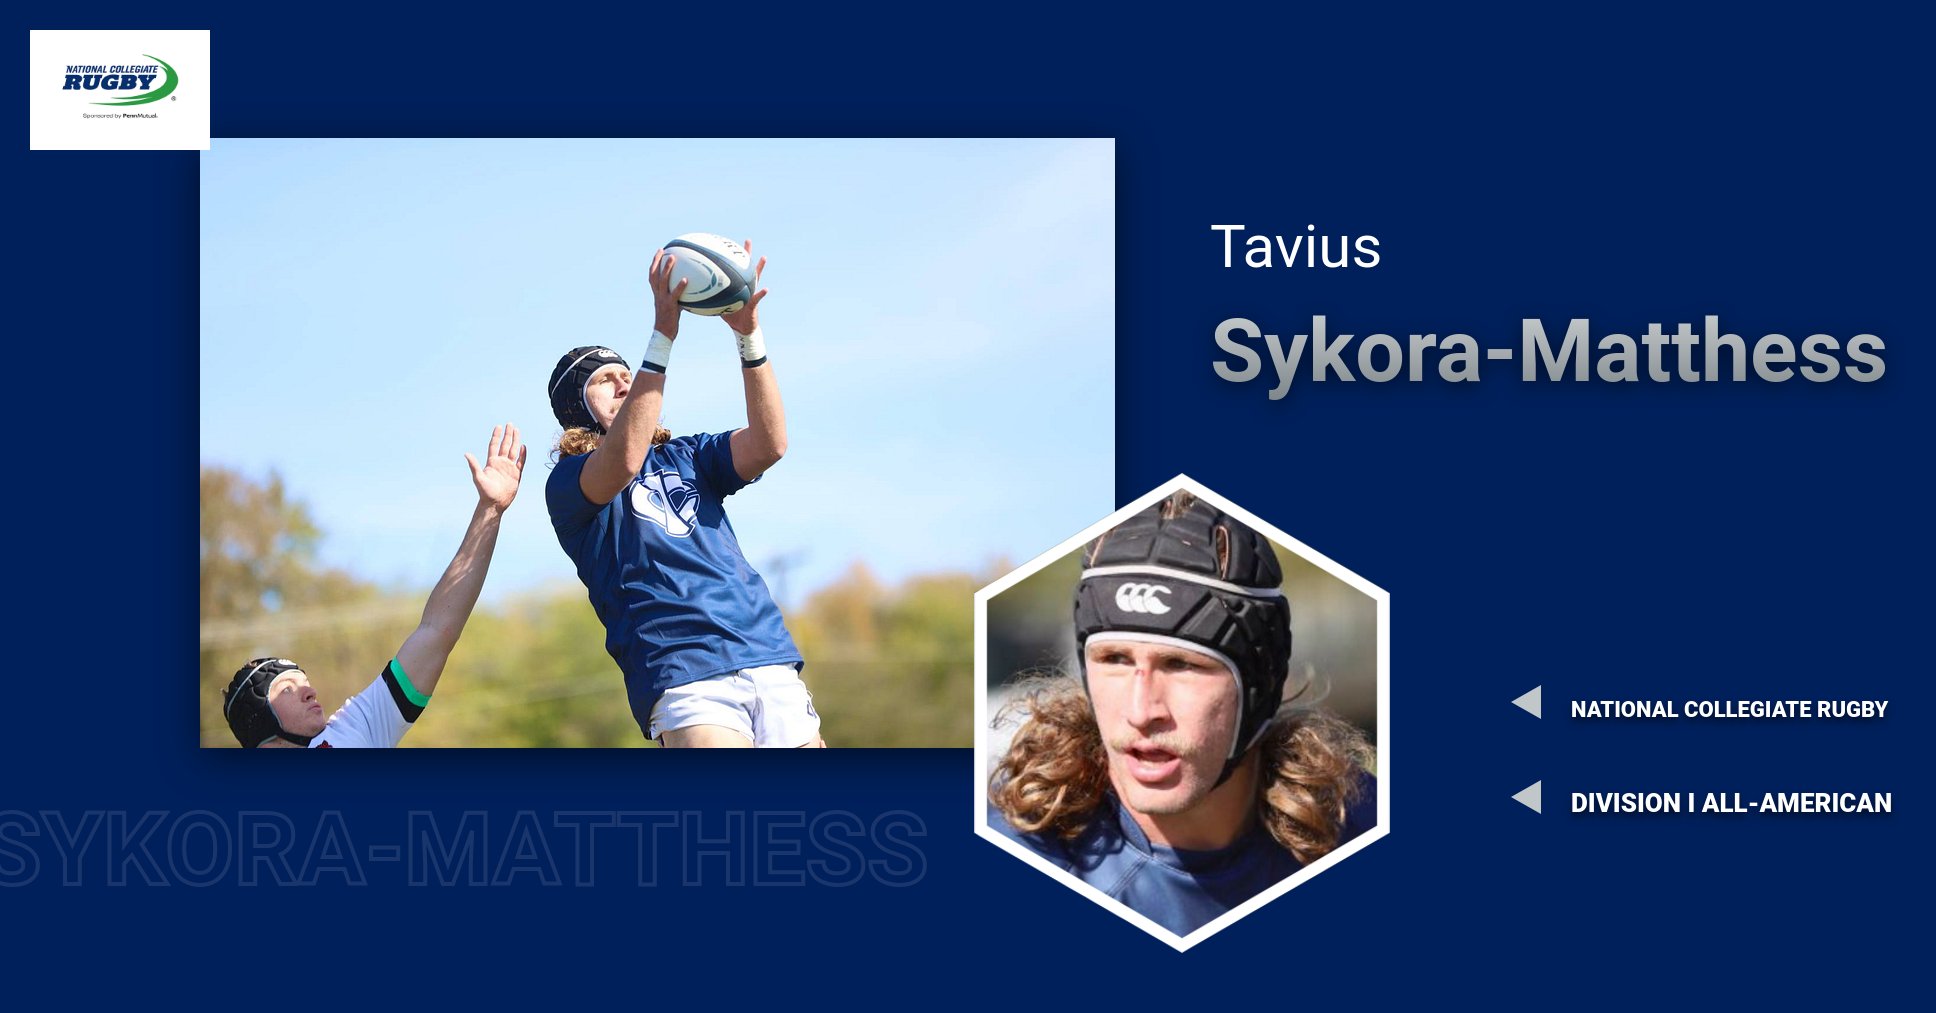 Sykora-Matthess named rugby All-American